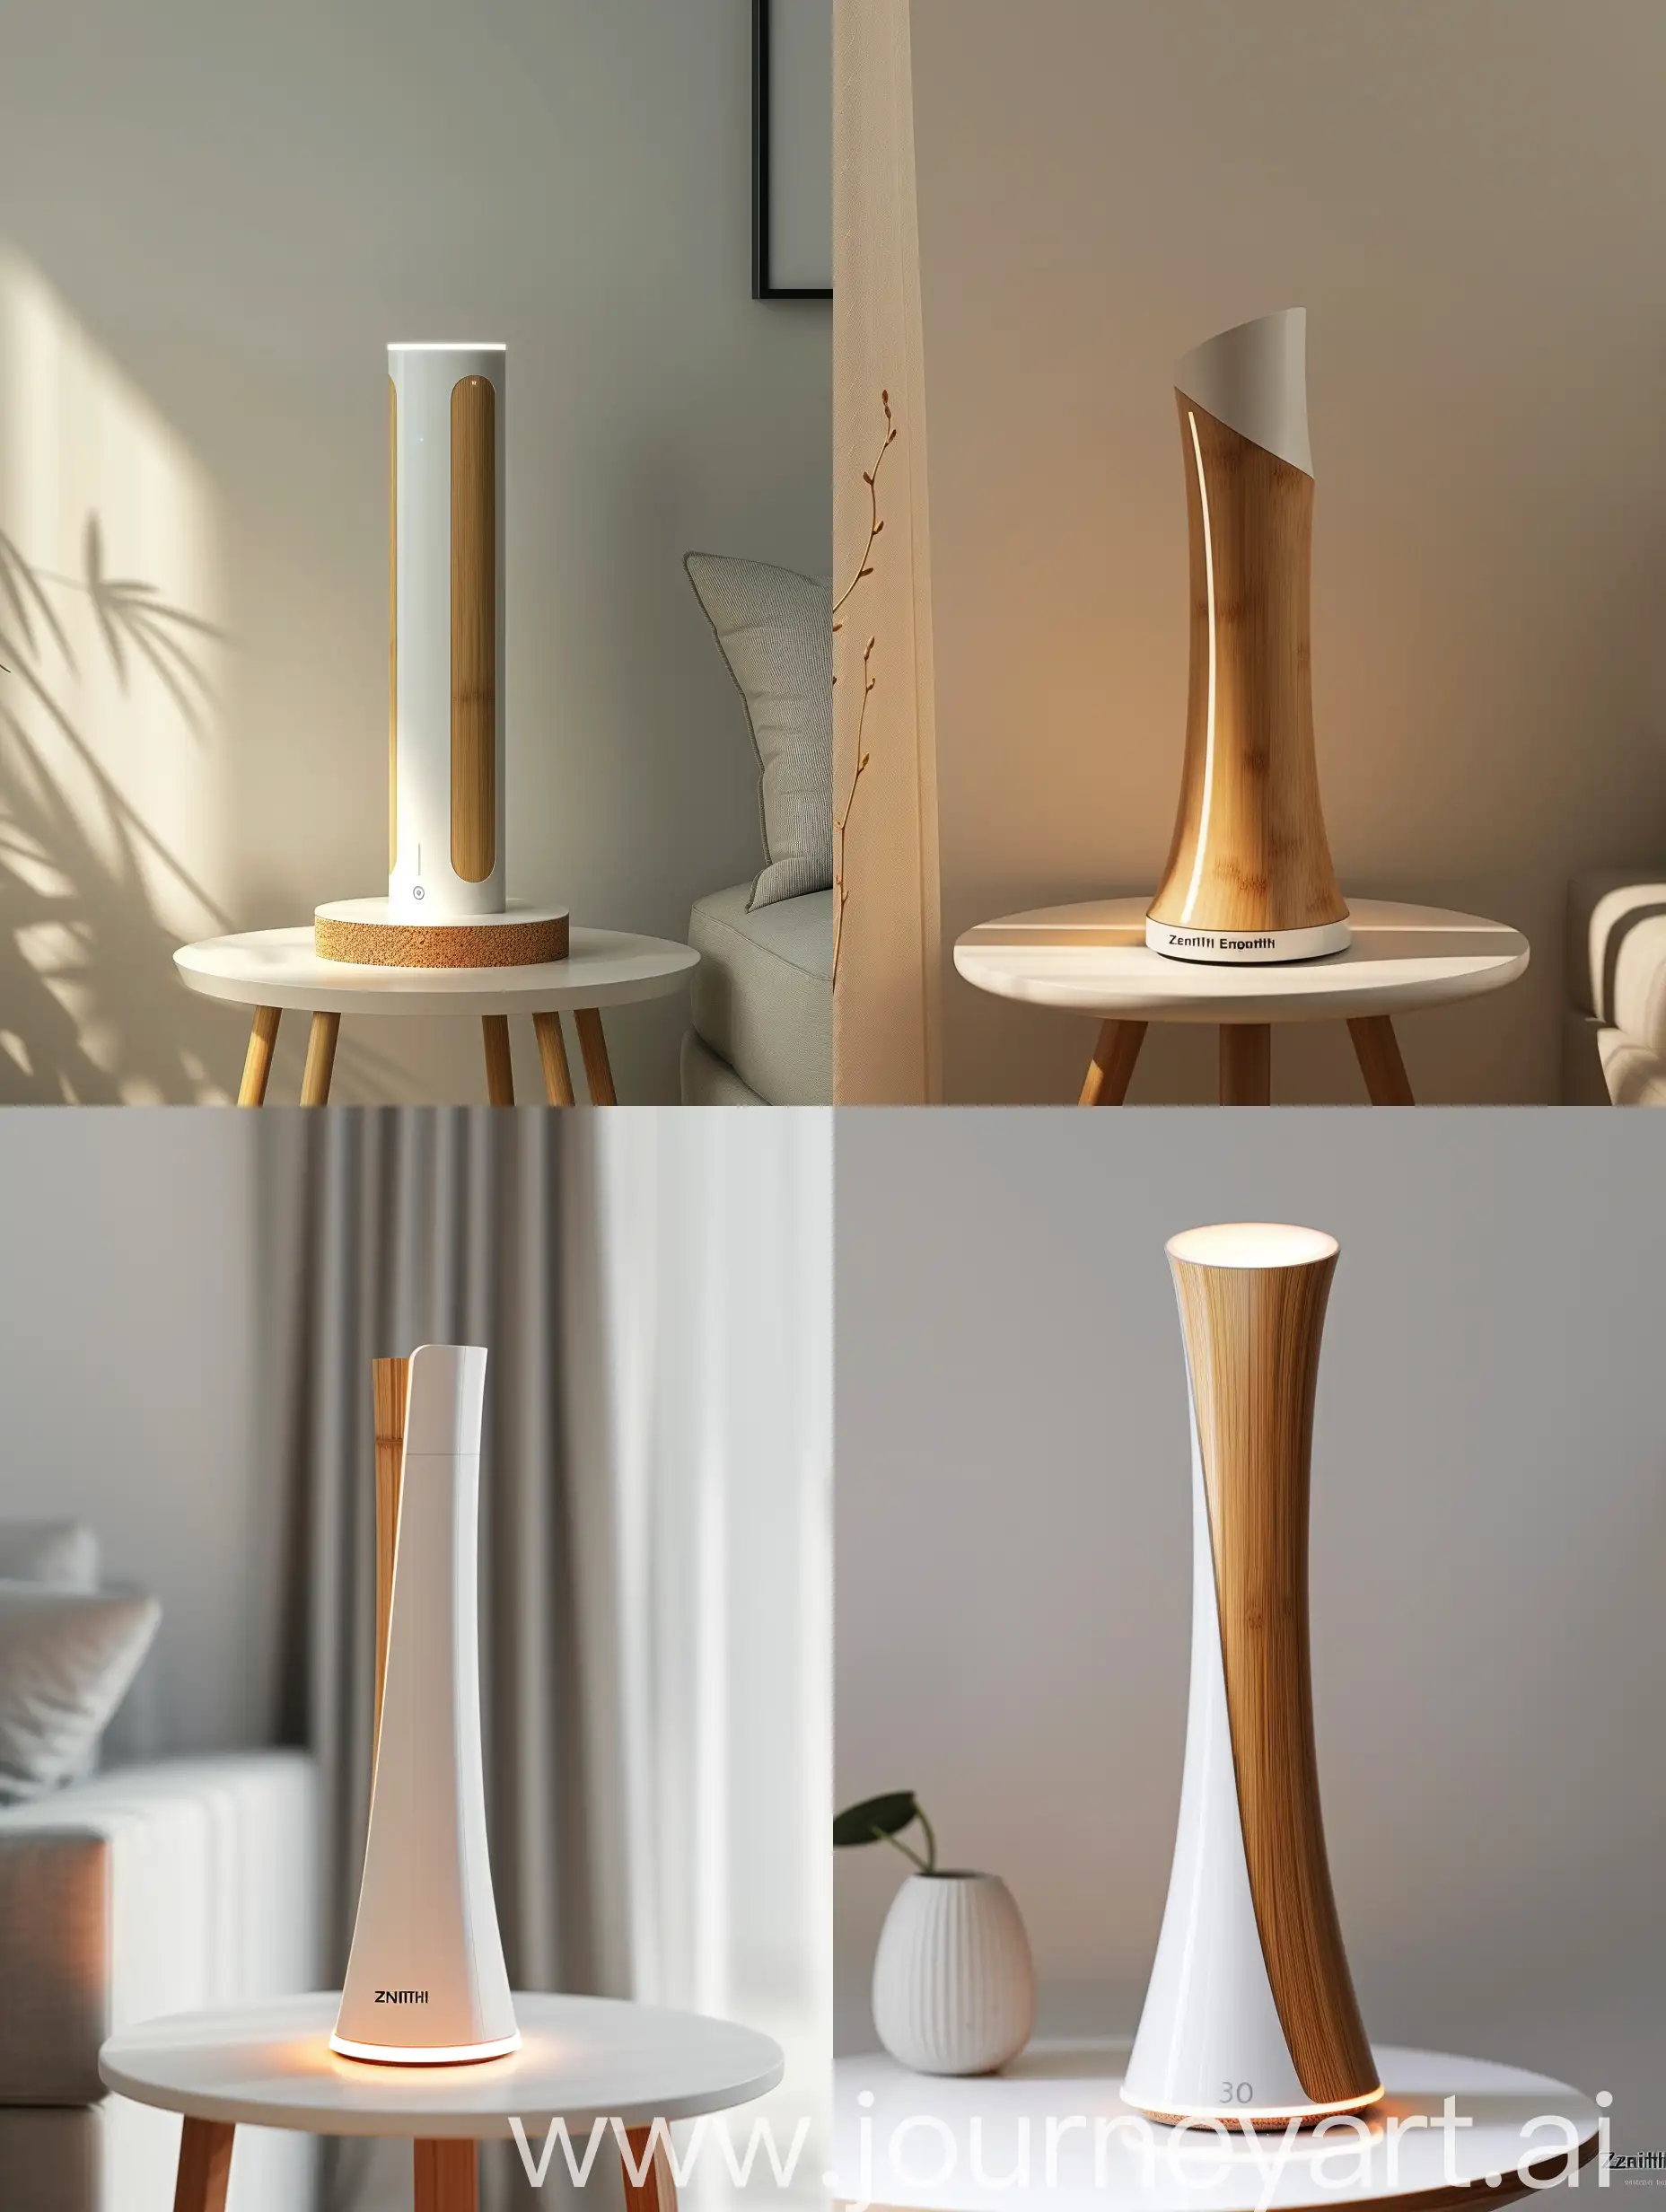 Visualize the Zenith Energy Gateway inspired of zen garden bamboo form and  Standing 30 cm tall with an 8 cm circular base diameter,its The body made from recycled plastics, shines in a pristine white or soft light gray, designed to complement any smart home decor with its understated elegance and base is crafted from sustainable bamboo, offering a warm, natural aesthetic that speaks to eco-friendliness and structure as a pinnacle of smart home energy management, blending modern design with environmental consciousness. This device embodies minimalism with its sleek, vertical silhouette, slightly tapered at the top for a subtle dynamic edge. Standing 30 cm tall with an 8 cm circular base diameter,The Zenith Energy Gateway features discreet, soft LED lighting at its base and edges, providing ambient illumination and notifications in a sophisticated manner. This lighting enhances the device's futuristic appeal, creating a visual connection between the device and its smart home environment.Designed to be both a functional energy management hub and a statement piece of technology, the Gateway stands on a minimalist side table or is mounted on a clean, white wall, integrating seamlessly into the smart home aesthetic. Its form factor and material choice symbolize a commitment to sustainability, innovation, and design excellence, aiming to resonate with modern homeowners who prioritize eco-conscious living without compromising on style.The image should capture the essence of the Zenith Energy Gateway in a contemporary setting, highlighting its role as an elegant, technologically advanced, and environmentally friendly addition to the smart home.product design style